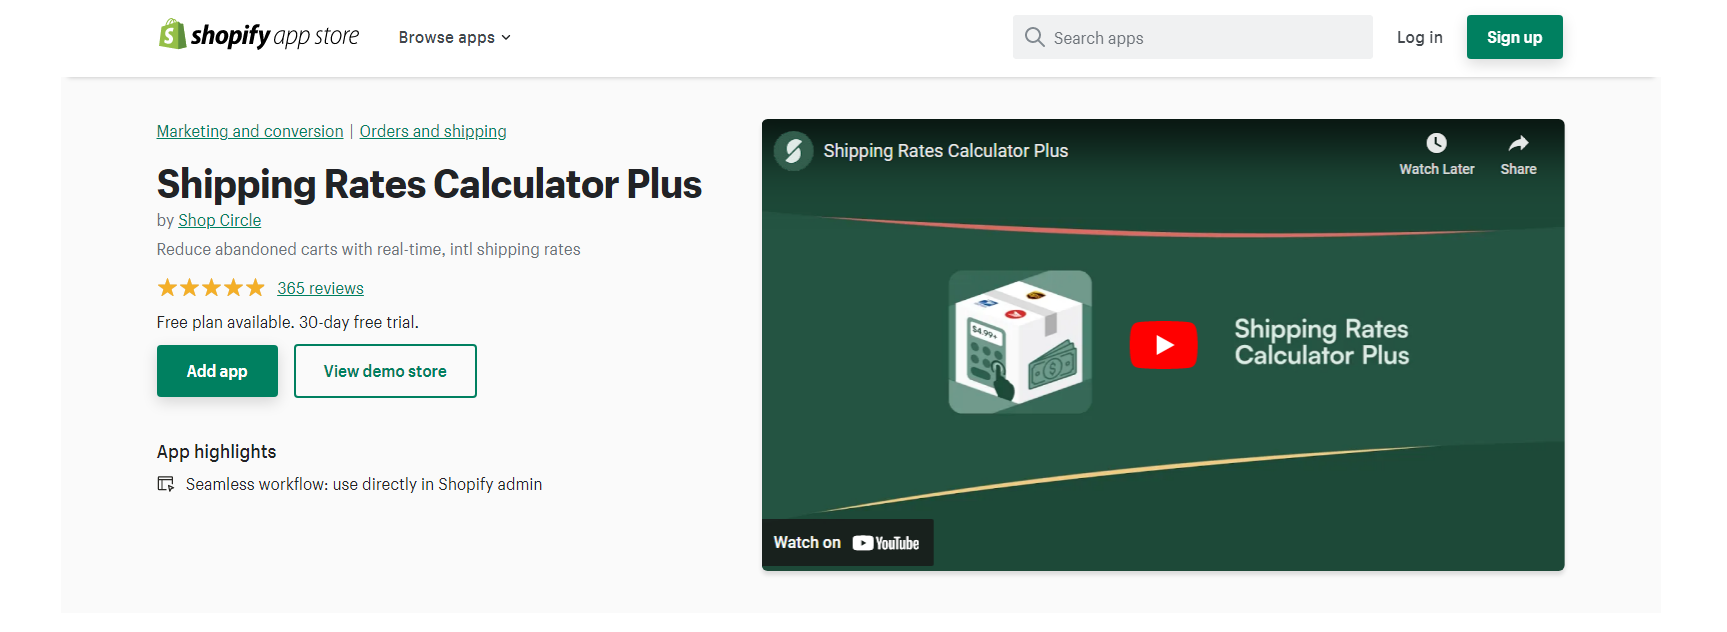 Shipping Rates Calculator Plus - Shopify shipping apps